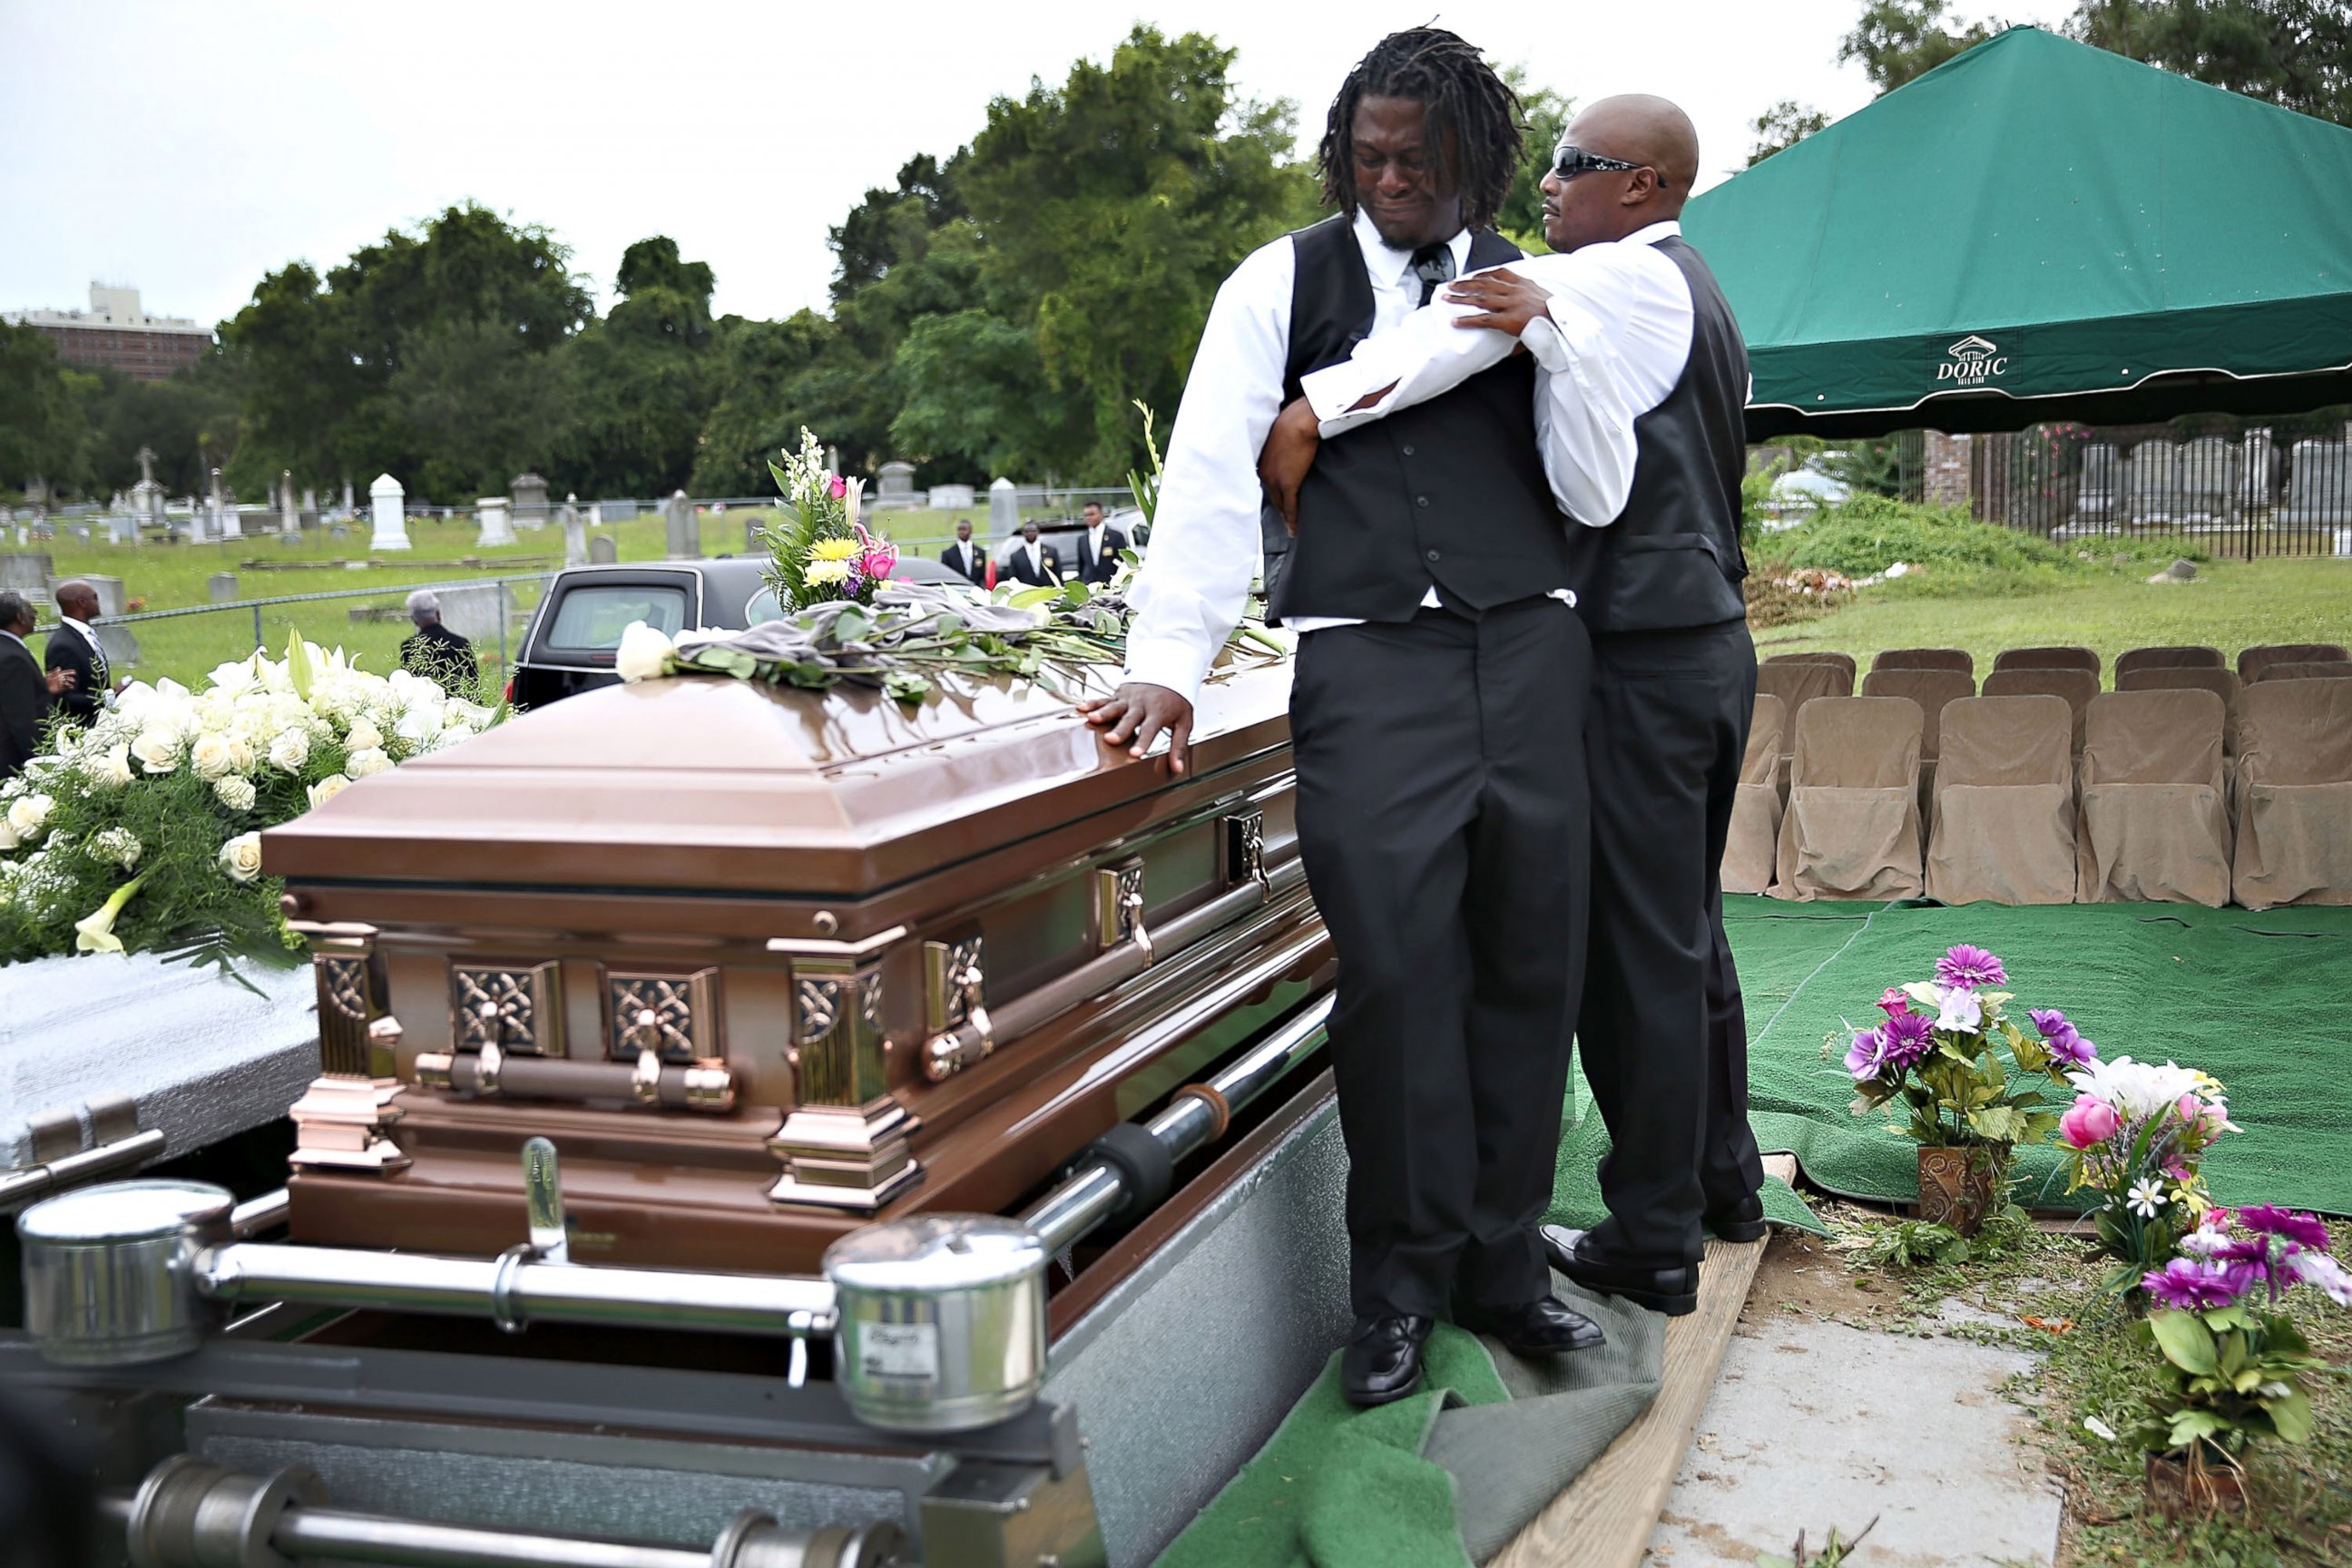 PHOTO: Brandon Risher, left, is comforted beside the casket of his grandmother, Ethel Lance, 70, one of nine victims of a mass shooting at the Emanuel AME Church, June 25, 2015 in North Charleston, S.C.